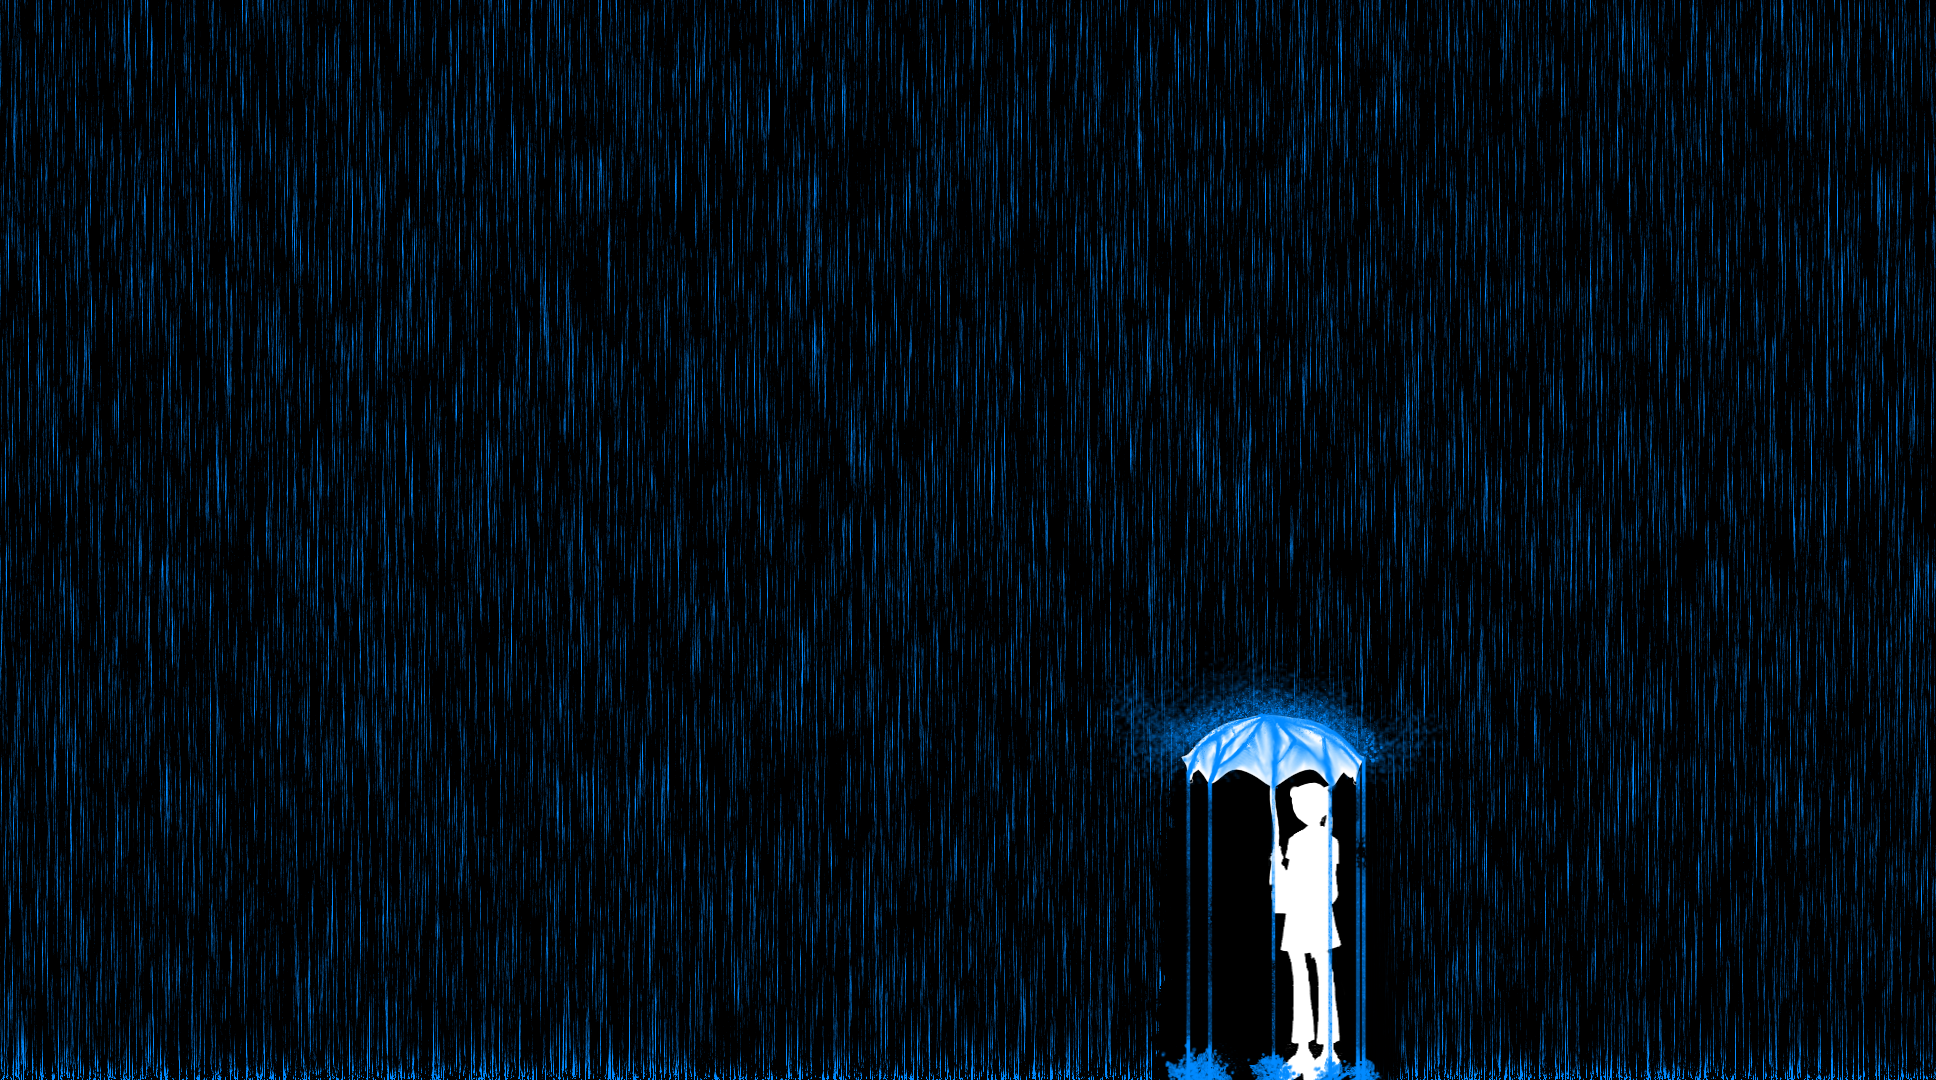 Rainy Day Wallpaper (TUTORIAL!) by theoneandonly06 on DeviantArt